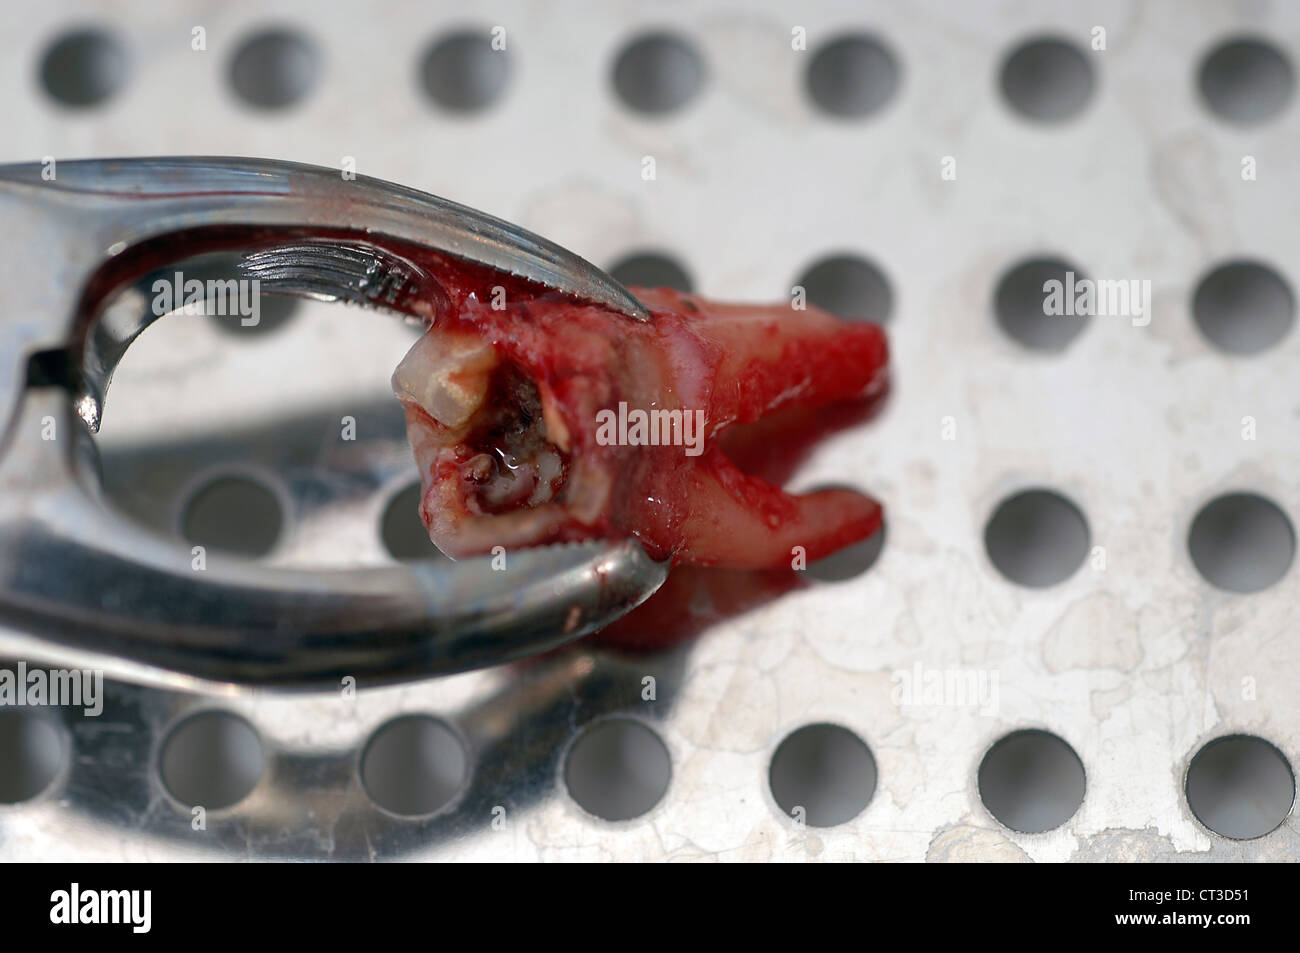 A decayed tooth that has been freshly removed from the mouth of a patient. Stock Photo